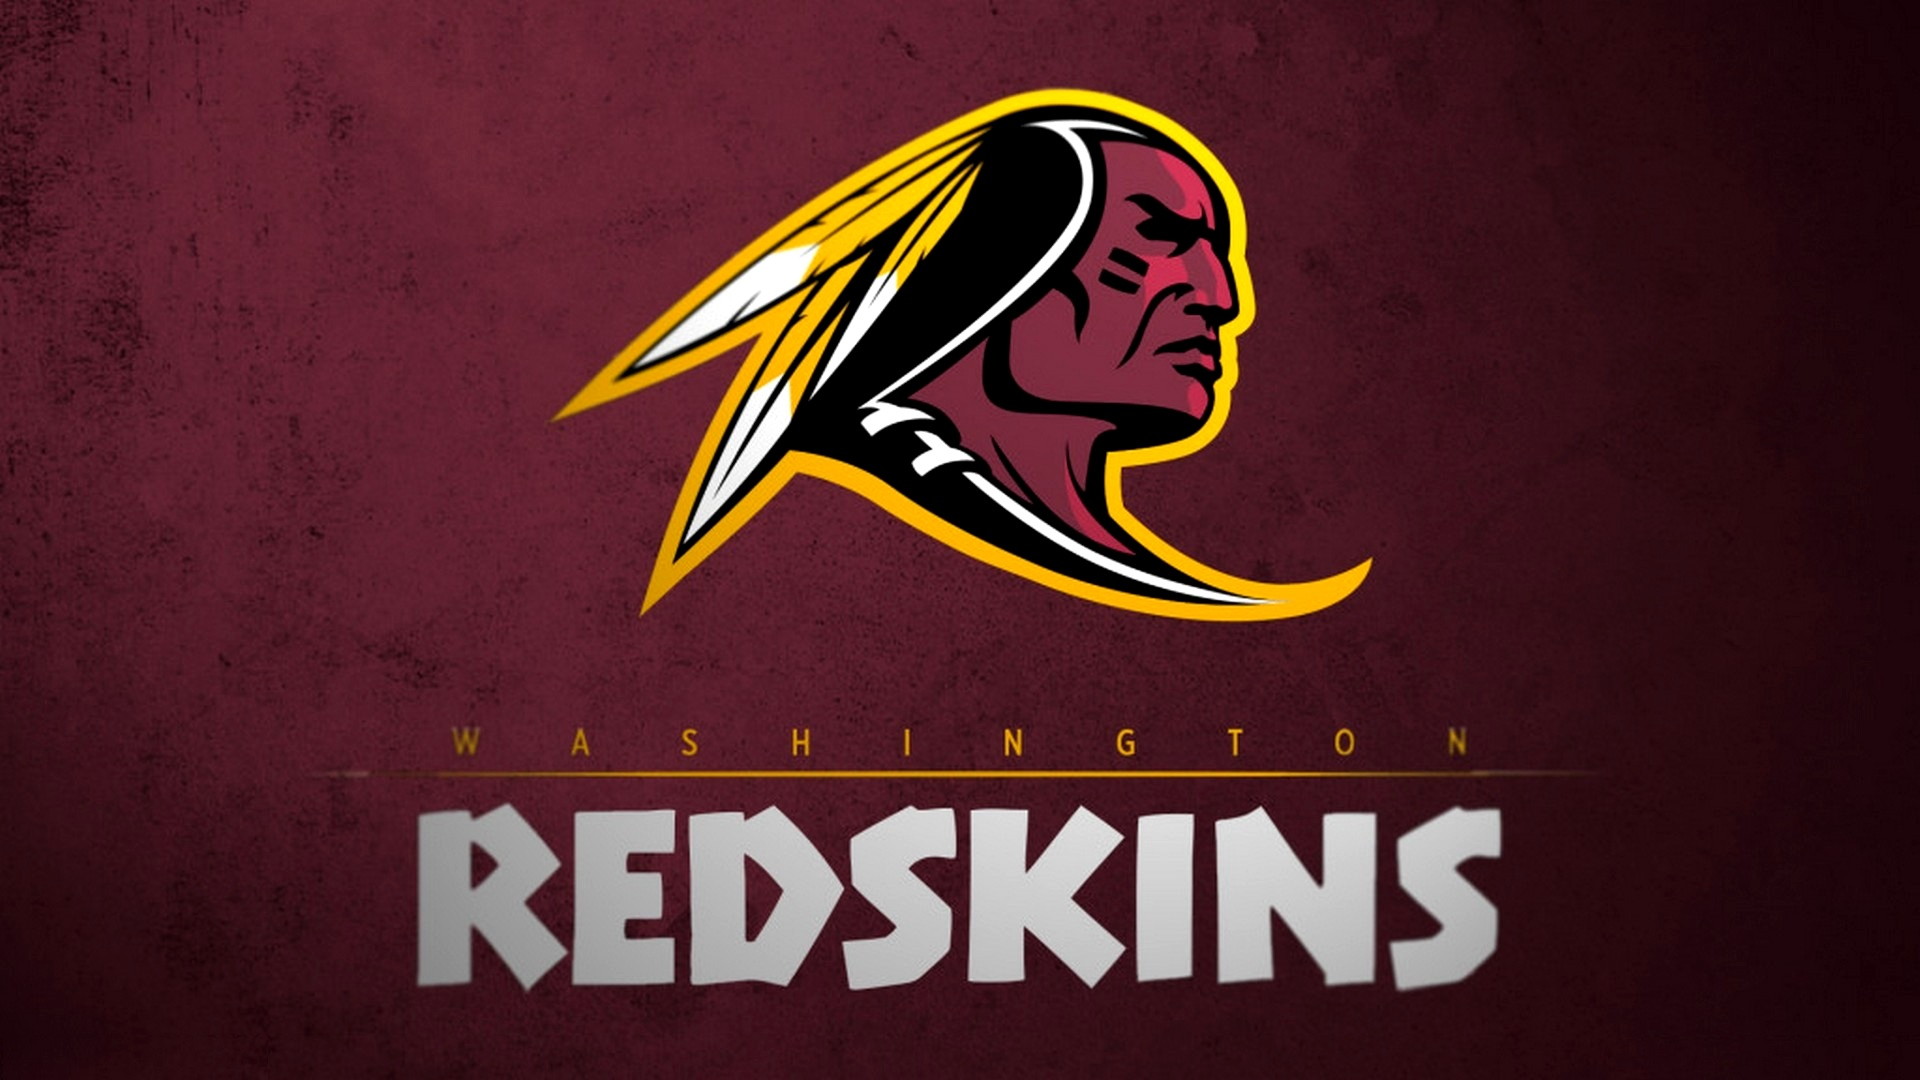 Washington Redskins Desktop Wallpaper HD with high-resolution 1920x1080 pixel. You can use and set as wallpaper for Notebook Screensavers, Mac Wallpapers, Mobile Home Screen, iPhone or Android Phones Lock Screen